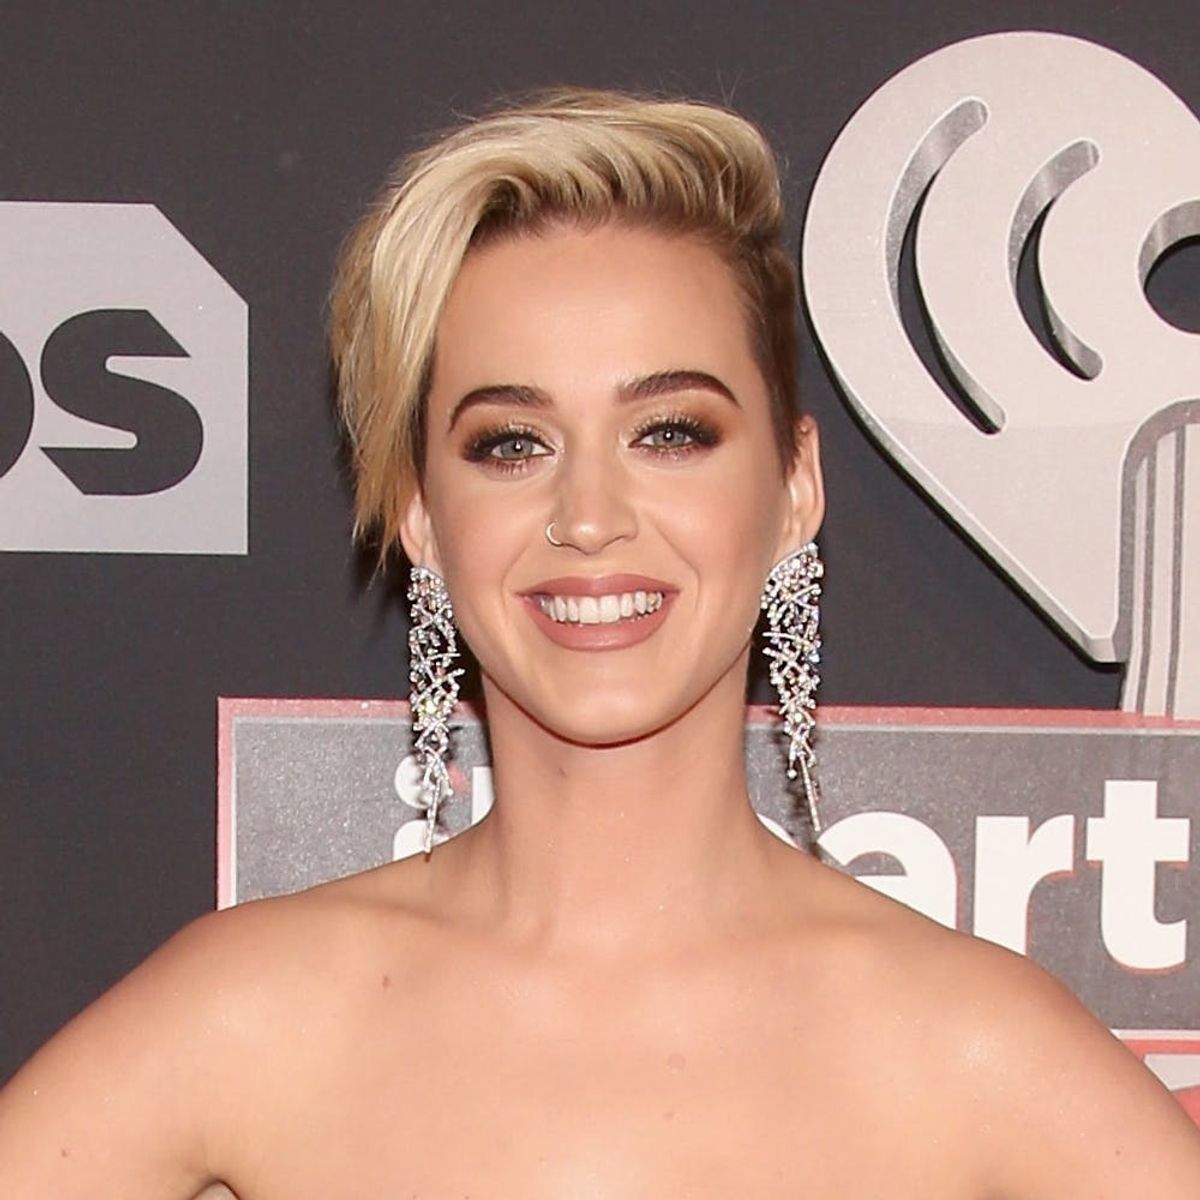 Katy Perry Had Quinoa in Her Teeth on the Red Carpet and No One Told Her